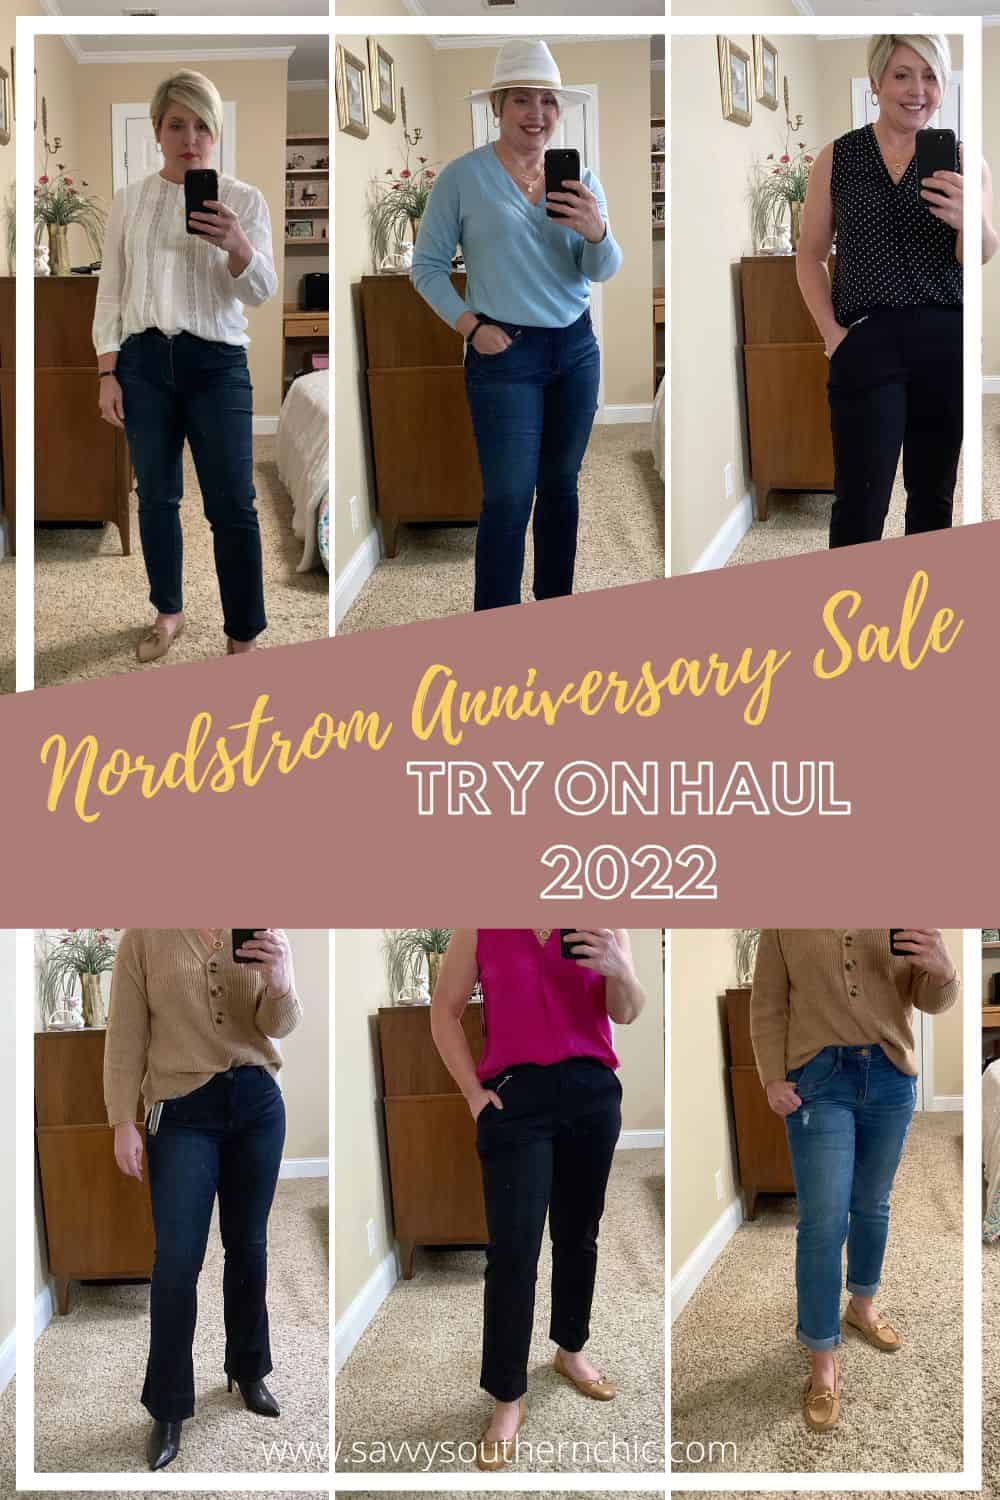 Nordstrom Anniversary Sale 2022 try on